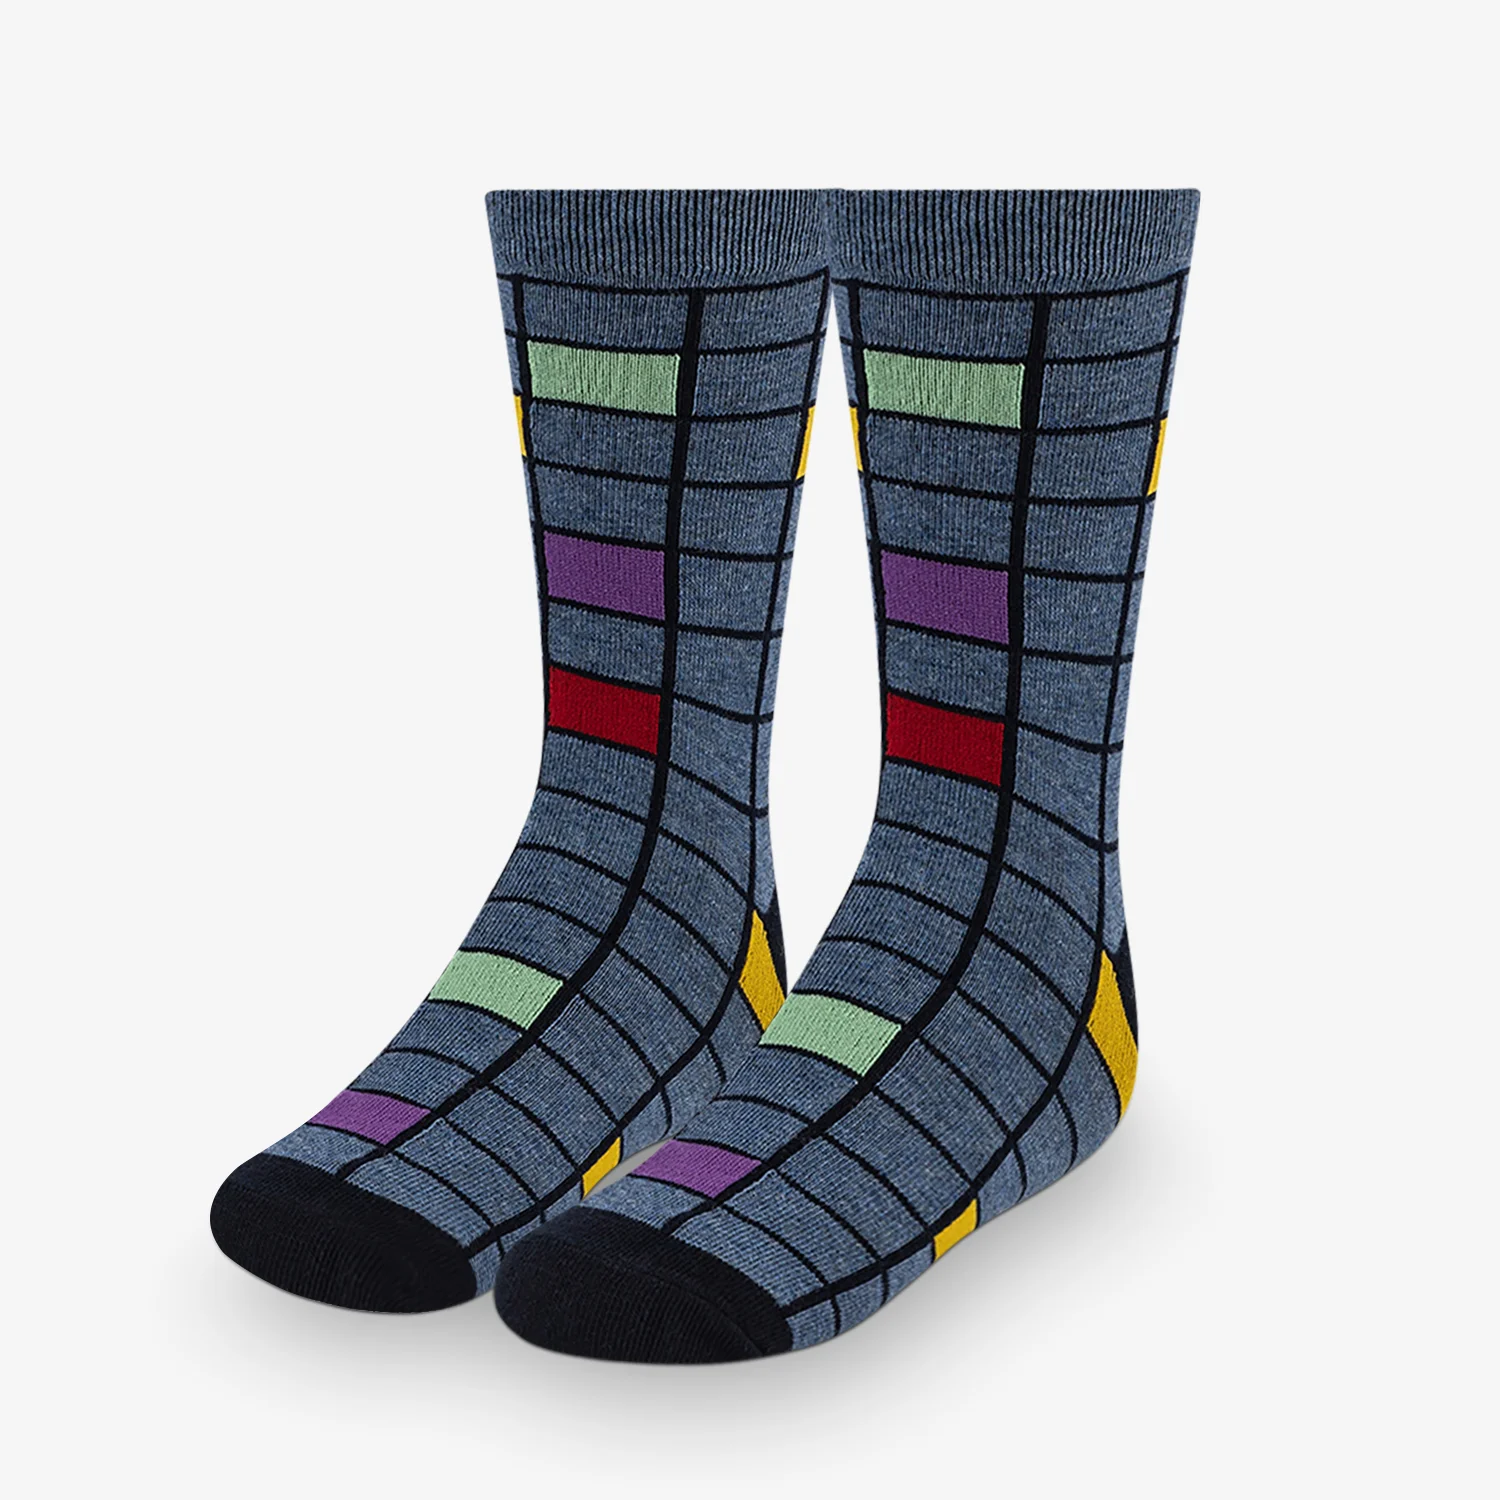 Boys dress Cotton Blend socks with colorful squares on them